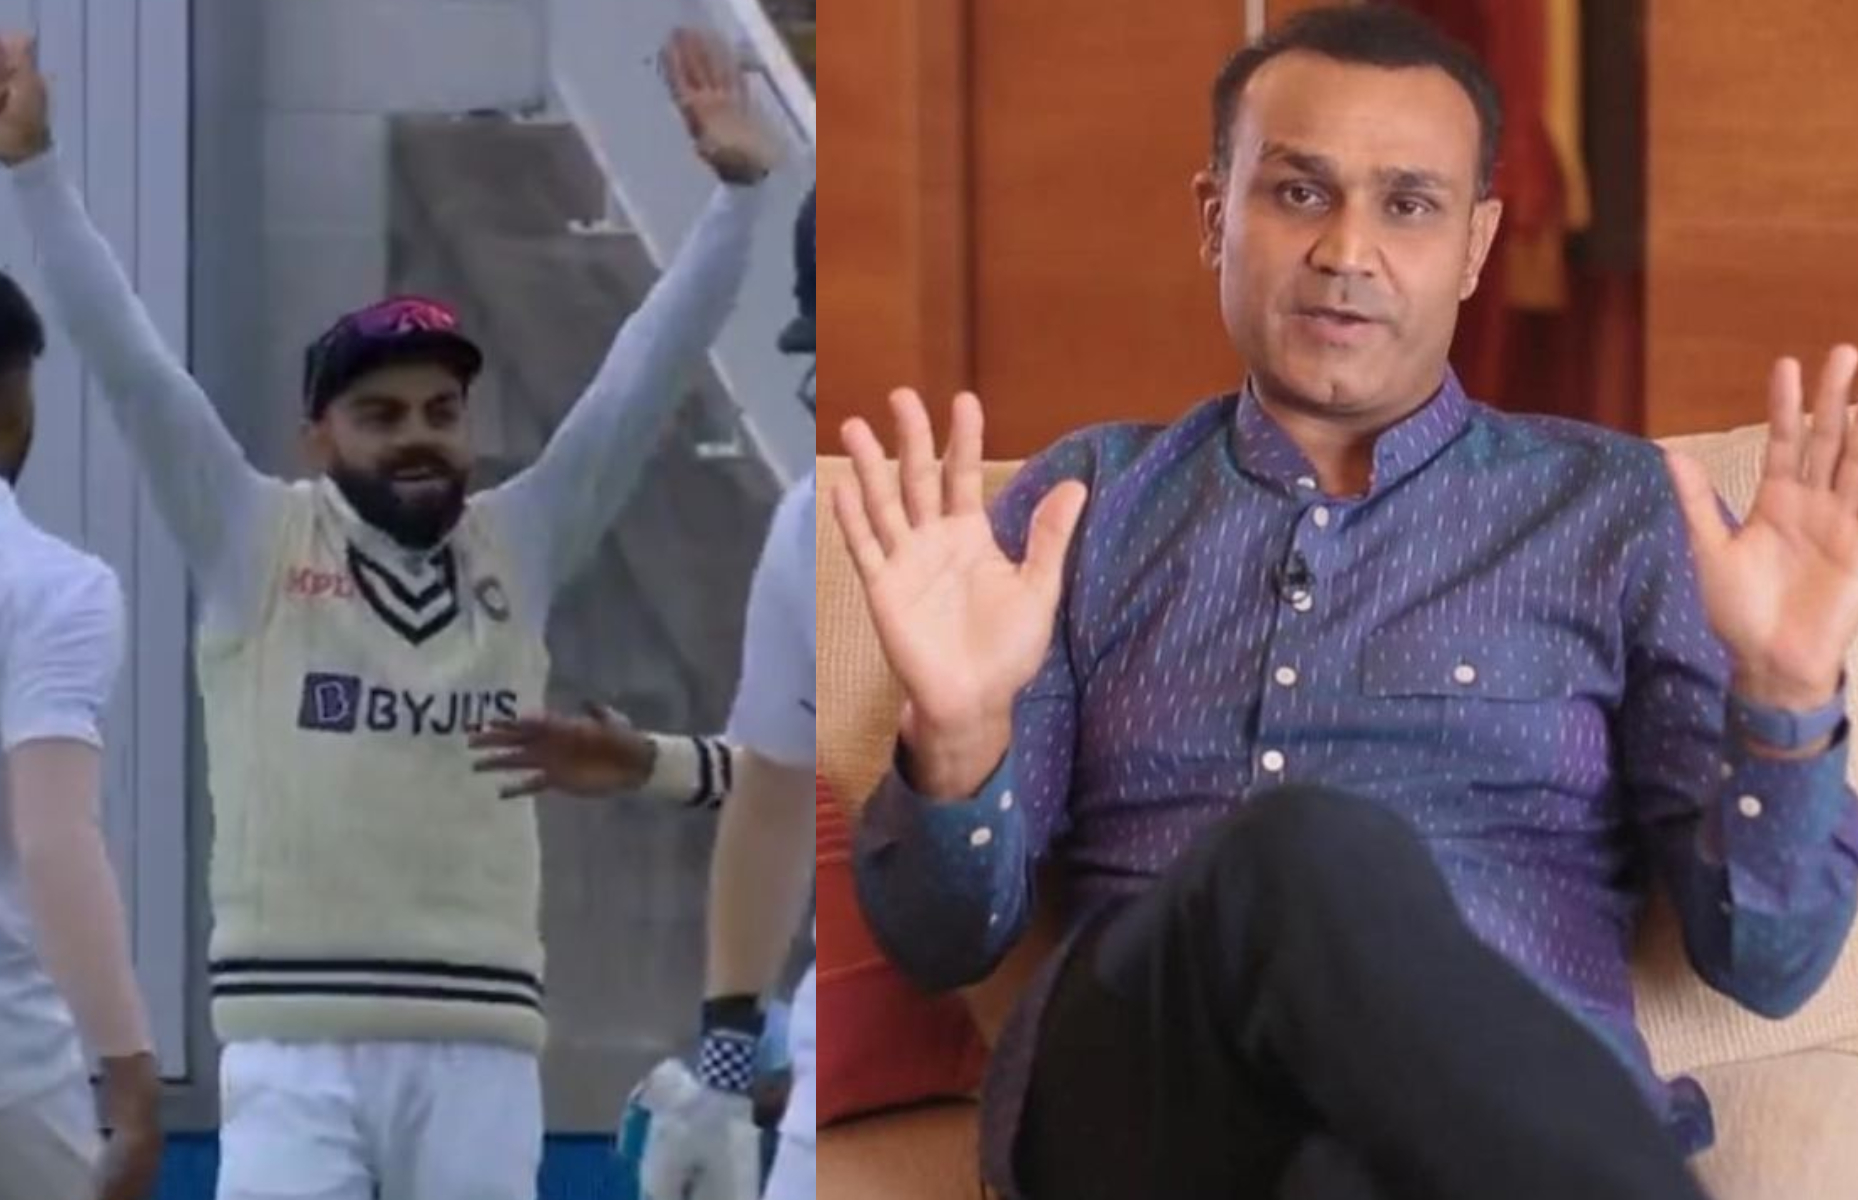 Sehwag used a derogatory term to describe Kohli's manner of celebration | Twitter